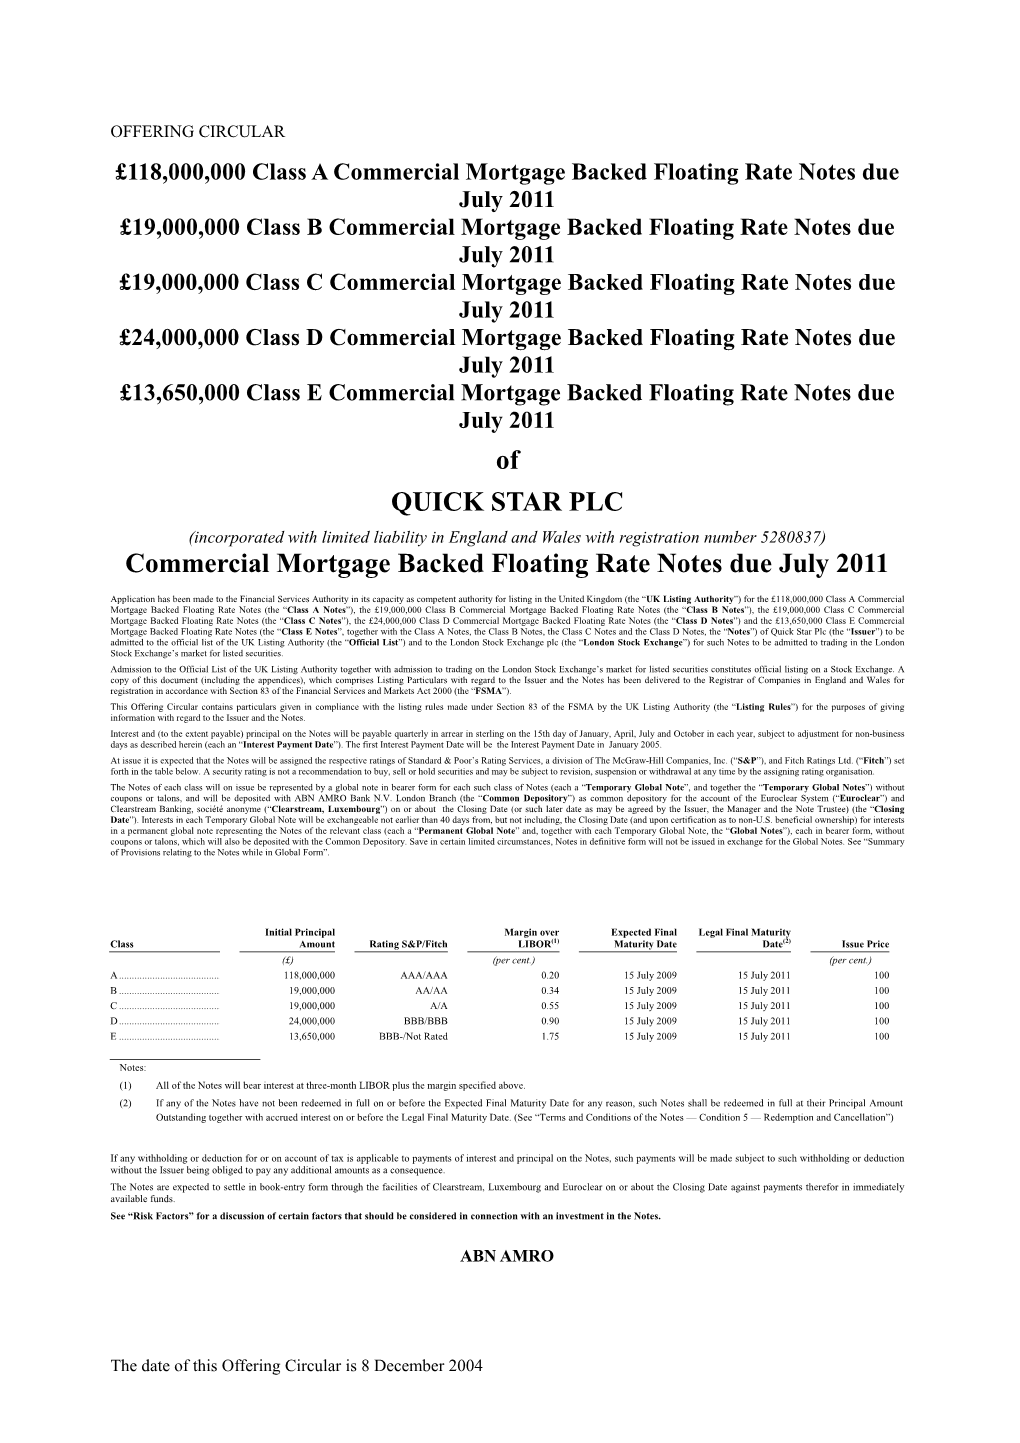 Of QUICK STAR PLC Commercial Mortgage Backed Floating Rate Notes Due July 2011